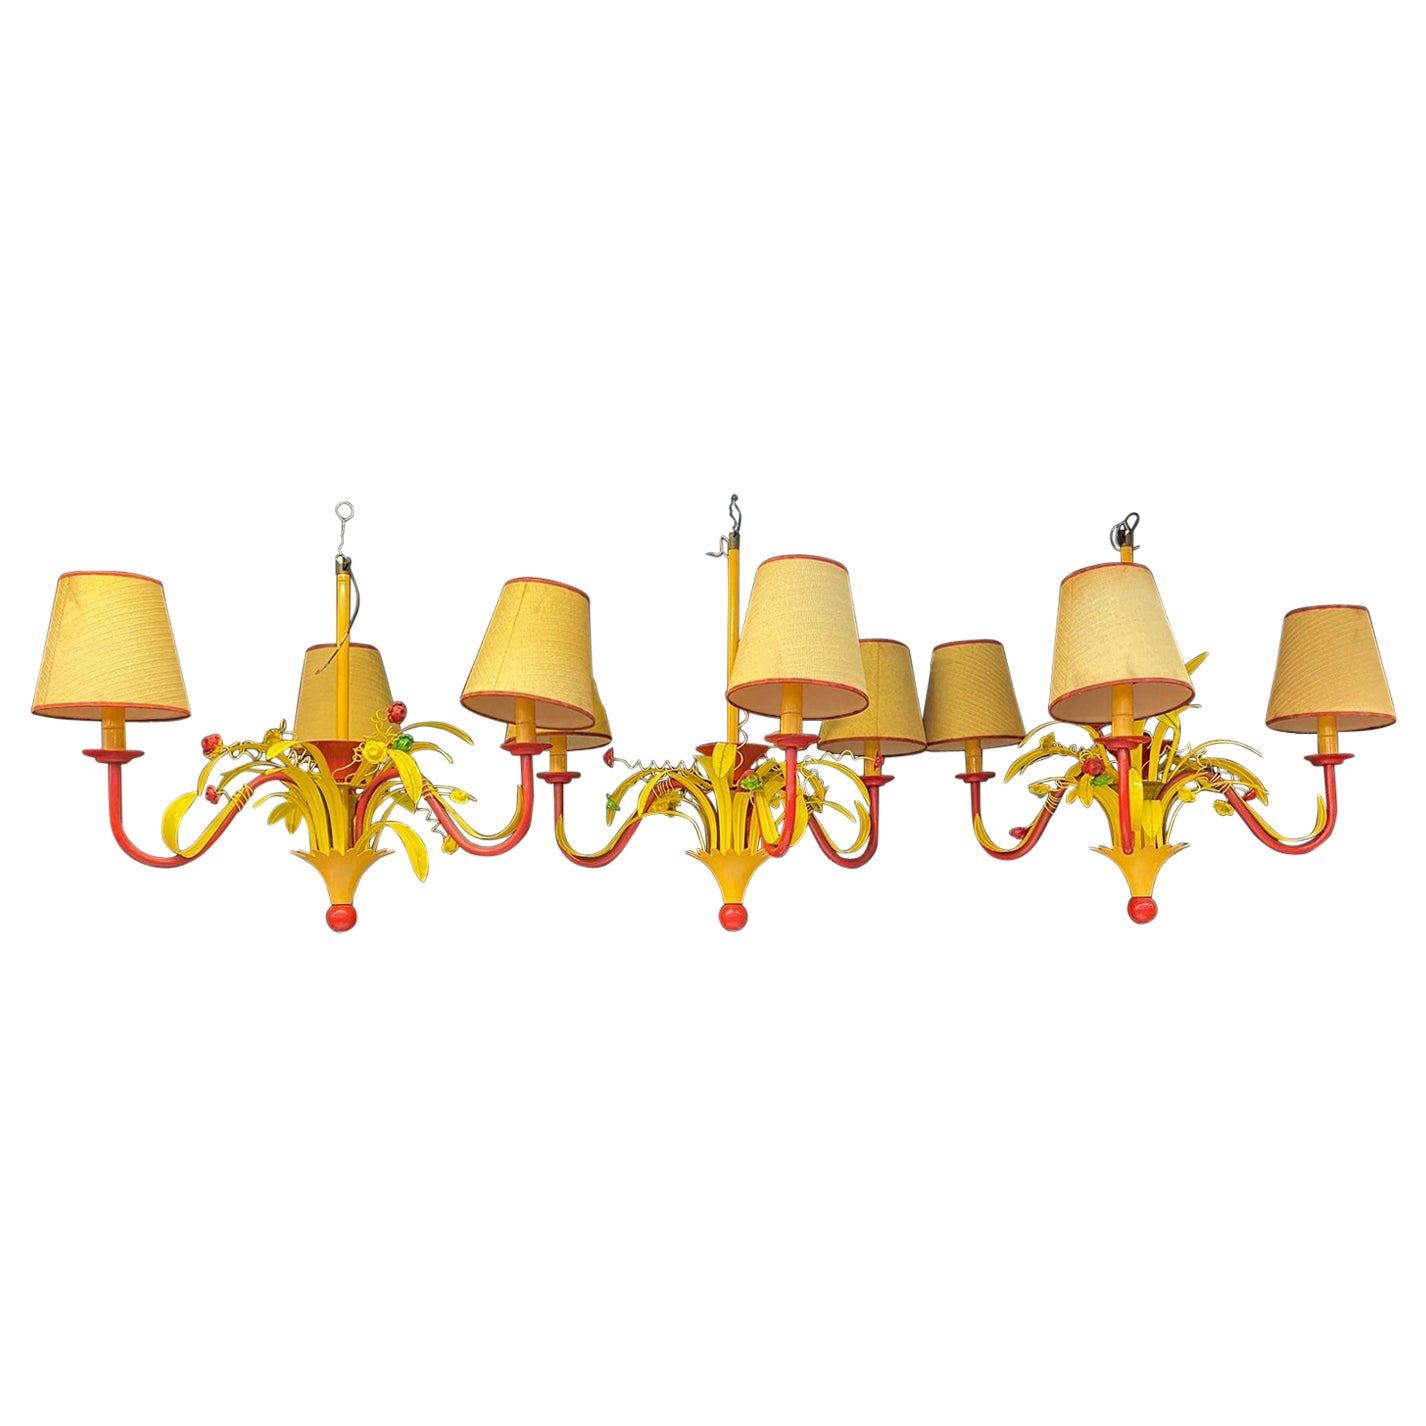 3 Circus Chandeliers in Lacquered Metal, circa 1970